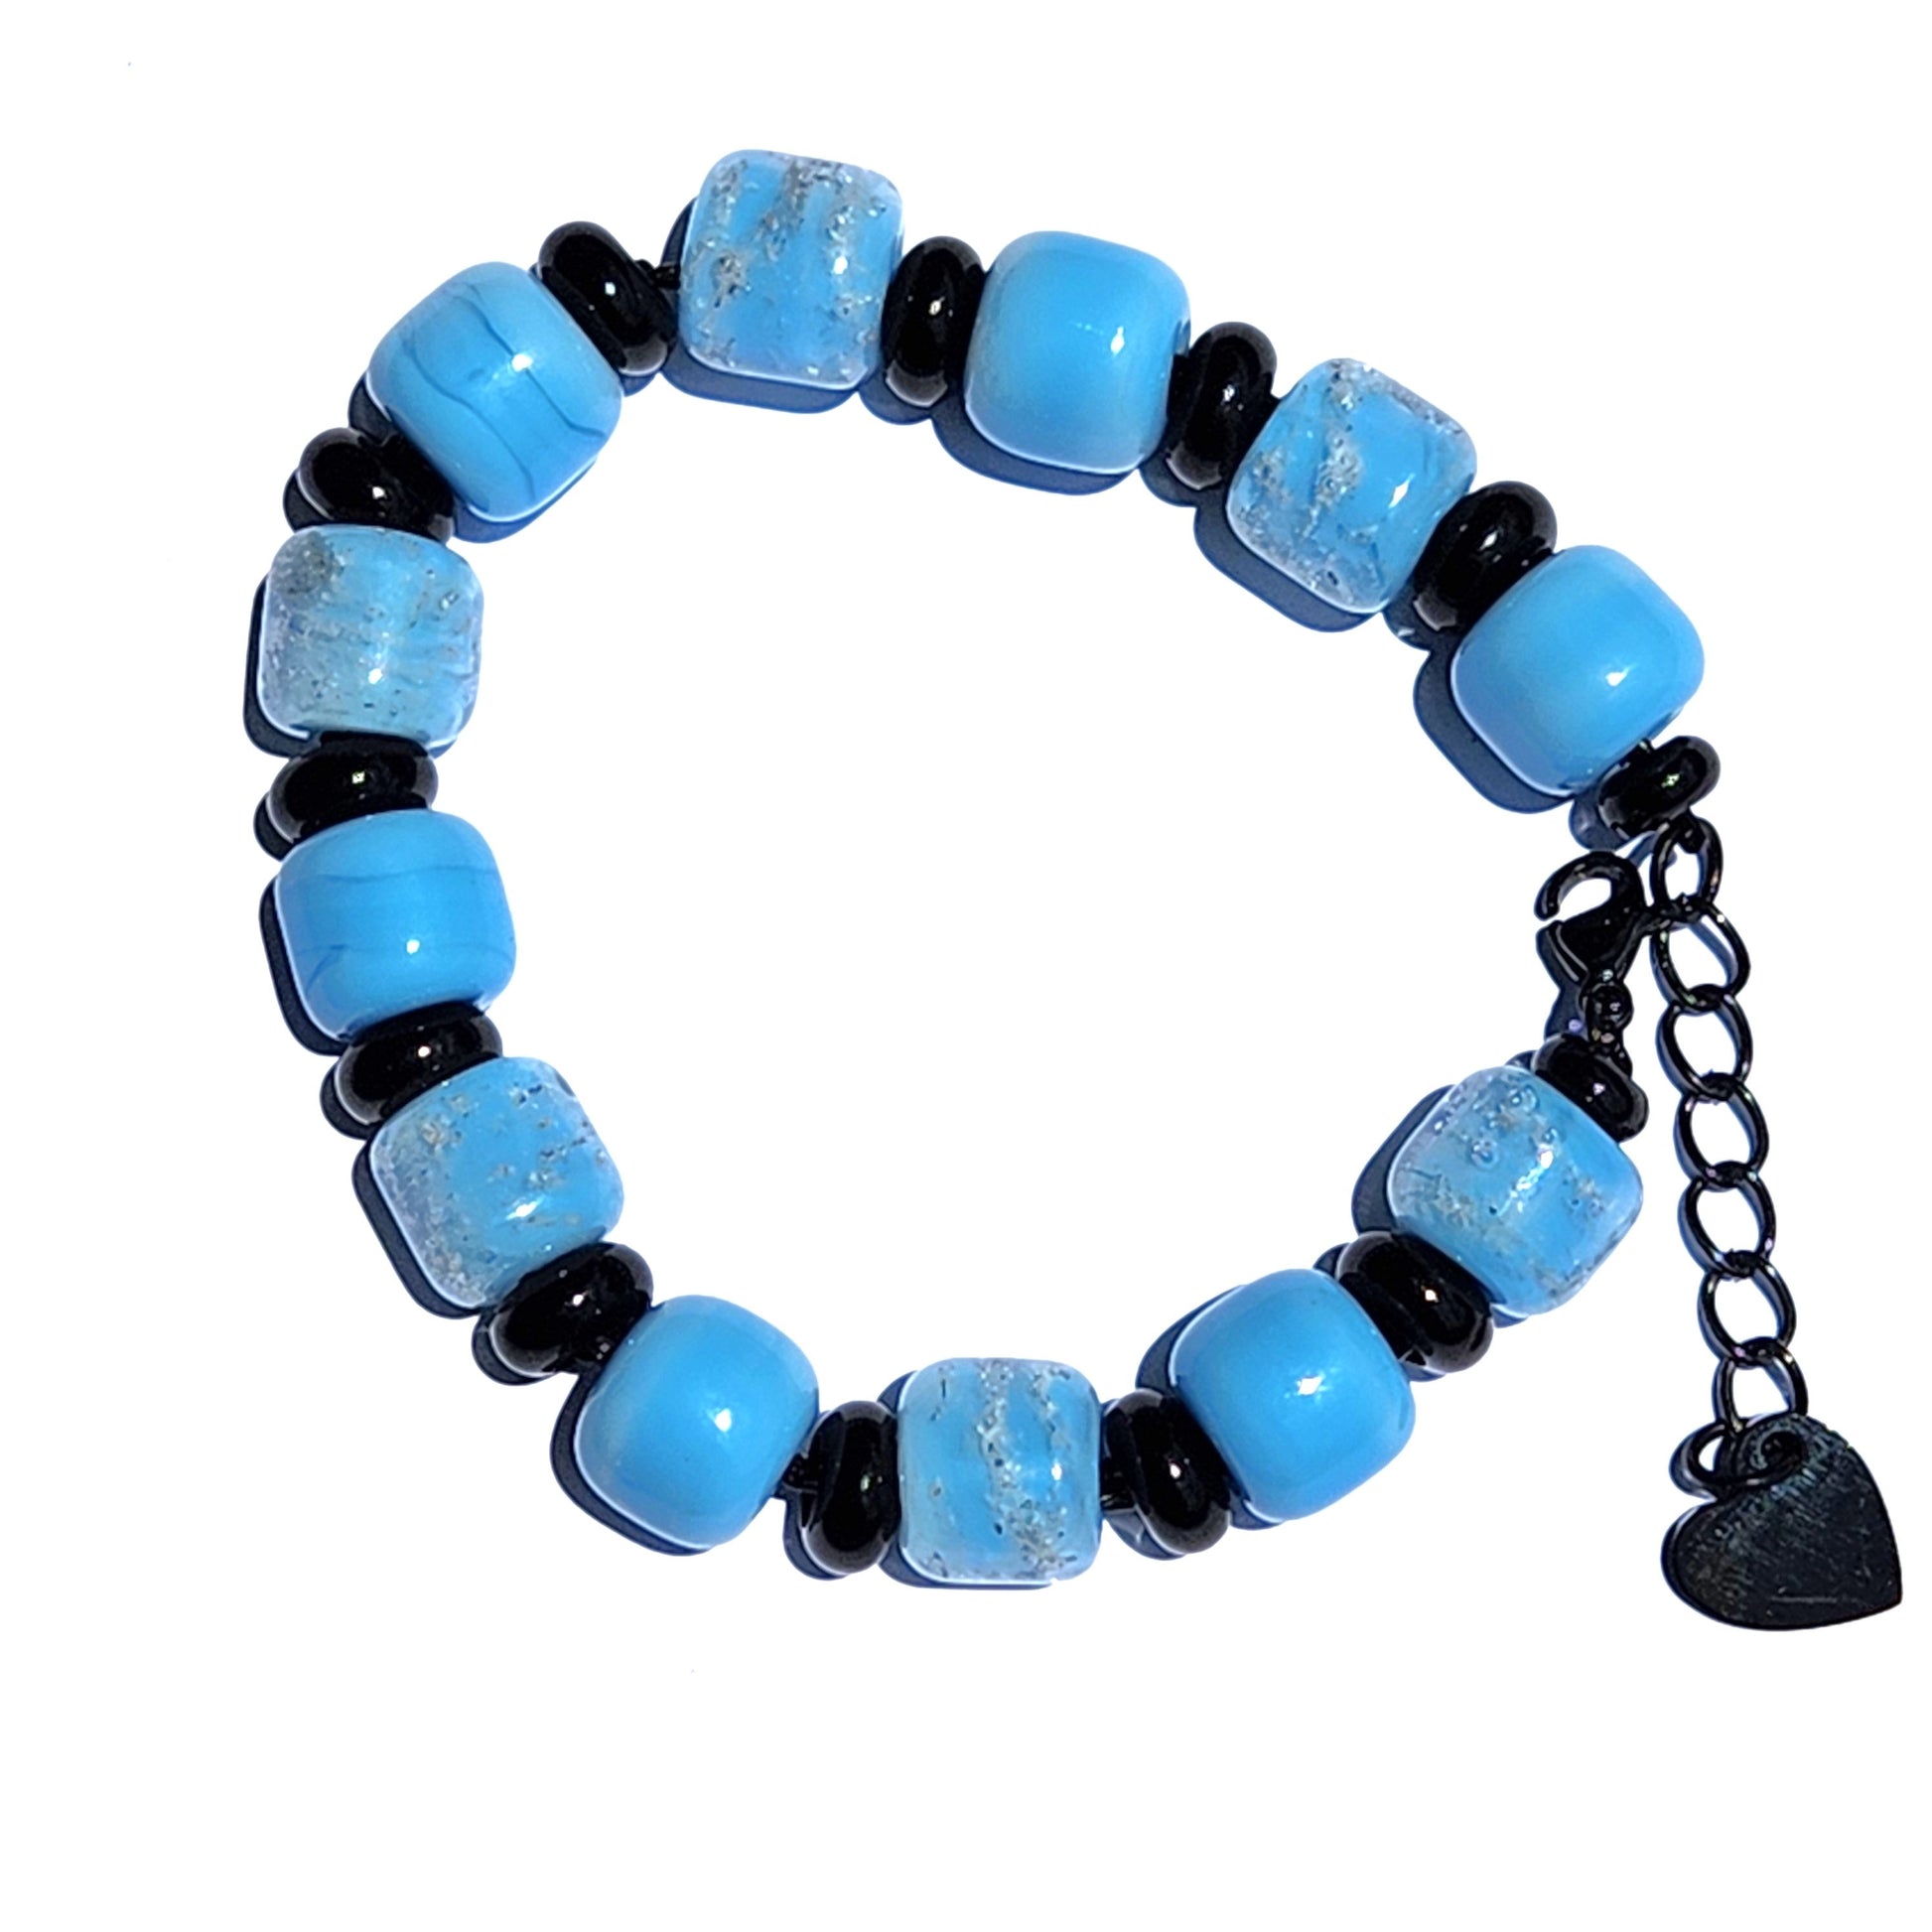 Eternal Cremation Bracelet With 6 Ash Beads - Sky Blue-Cremation Beads-DragonFire Glass-Black-DragonFire Glass Cremation Jewelry